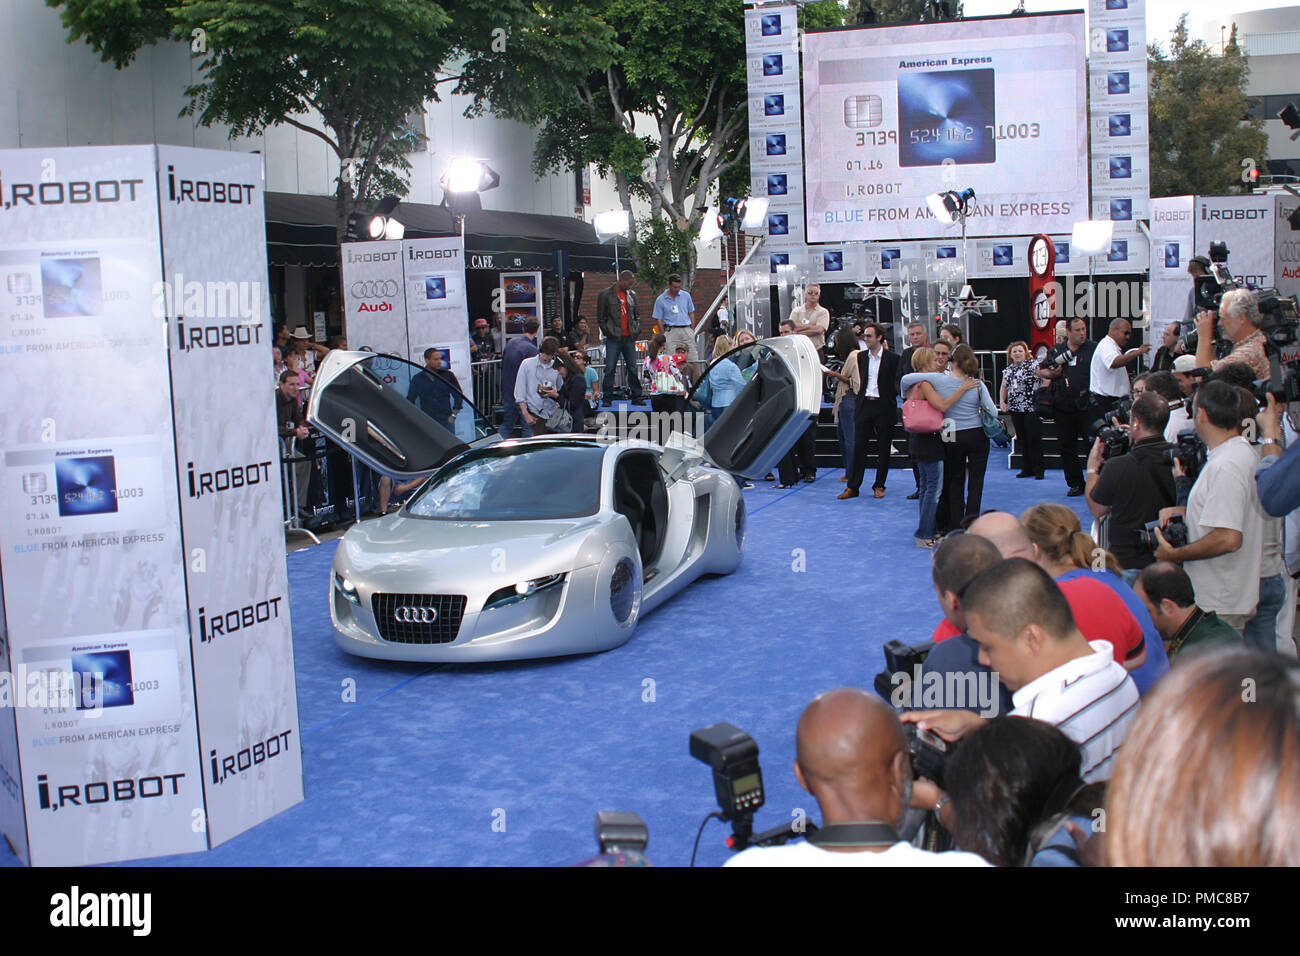 'I, Robot' Premiere  7-7-2004 'I, Robot' Car by Lexus Photo by Joseph Martinez / PictureLux   File Reference # 21872 0004PLX  For Editorial Use Only -  All Rights Reserved Stock Photo